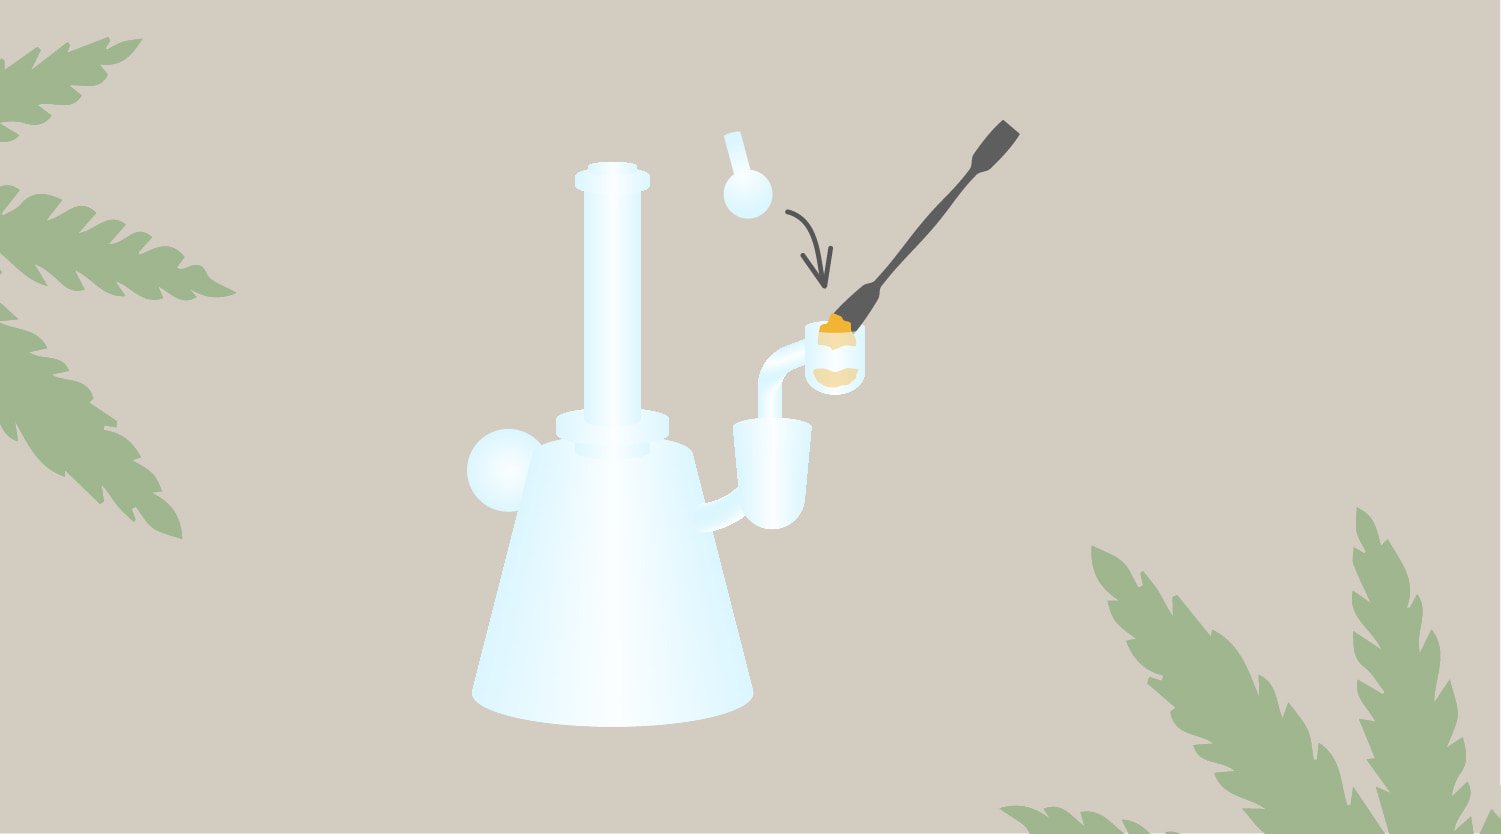 Step-by-step guide to dabbing